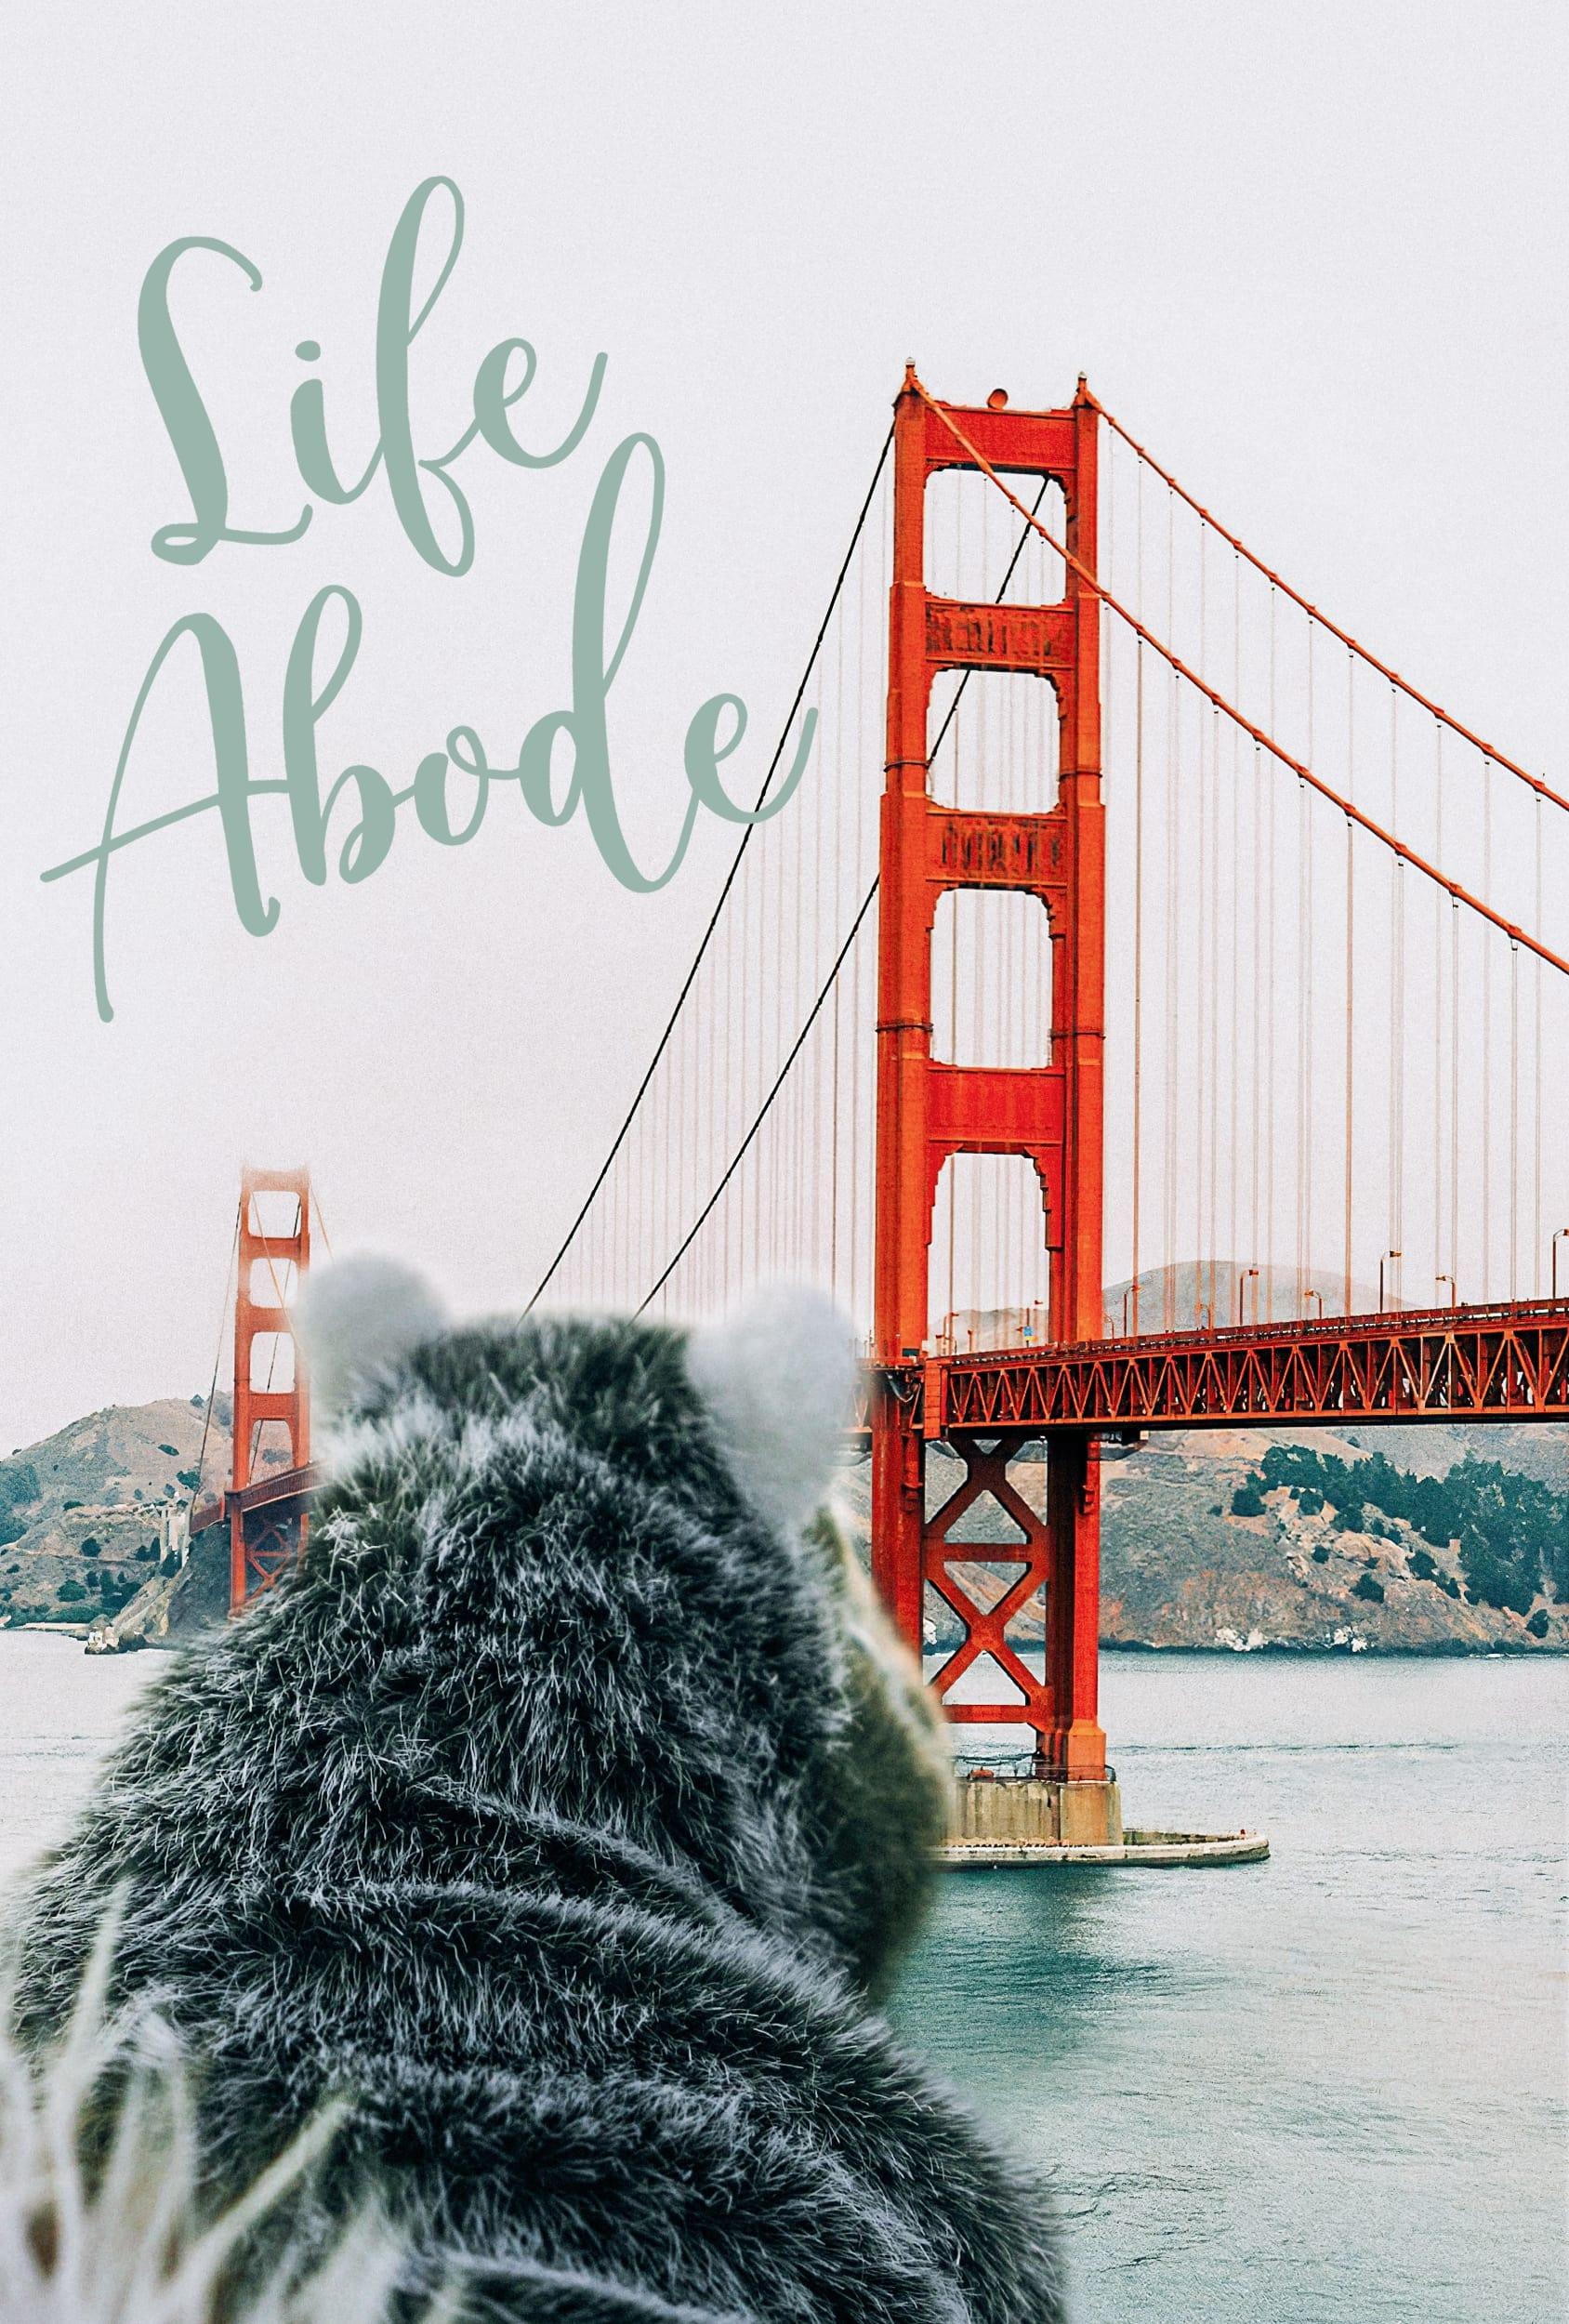 Life Abode poster